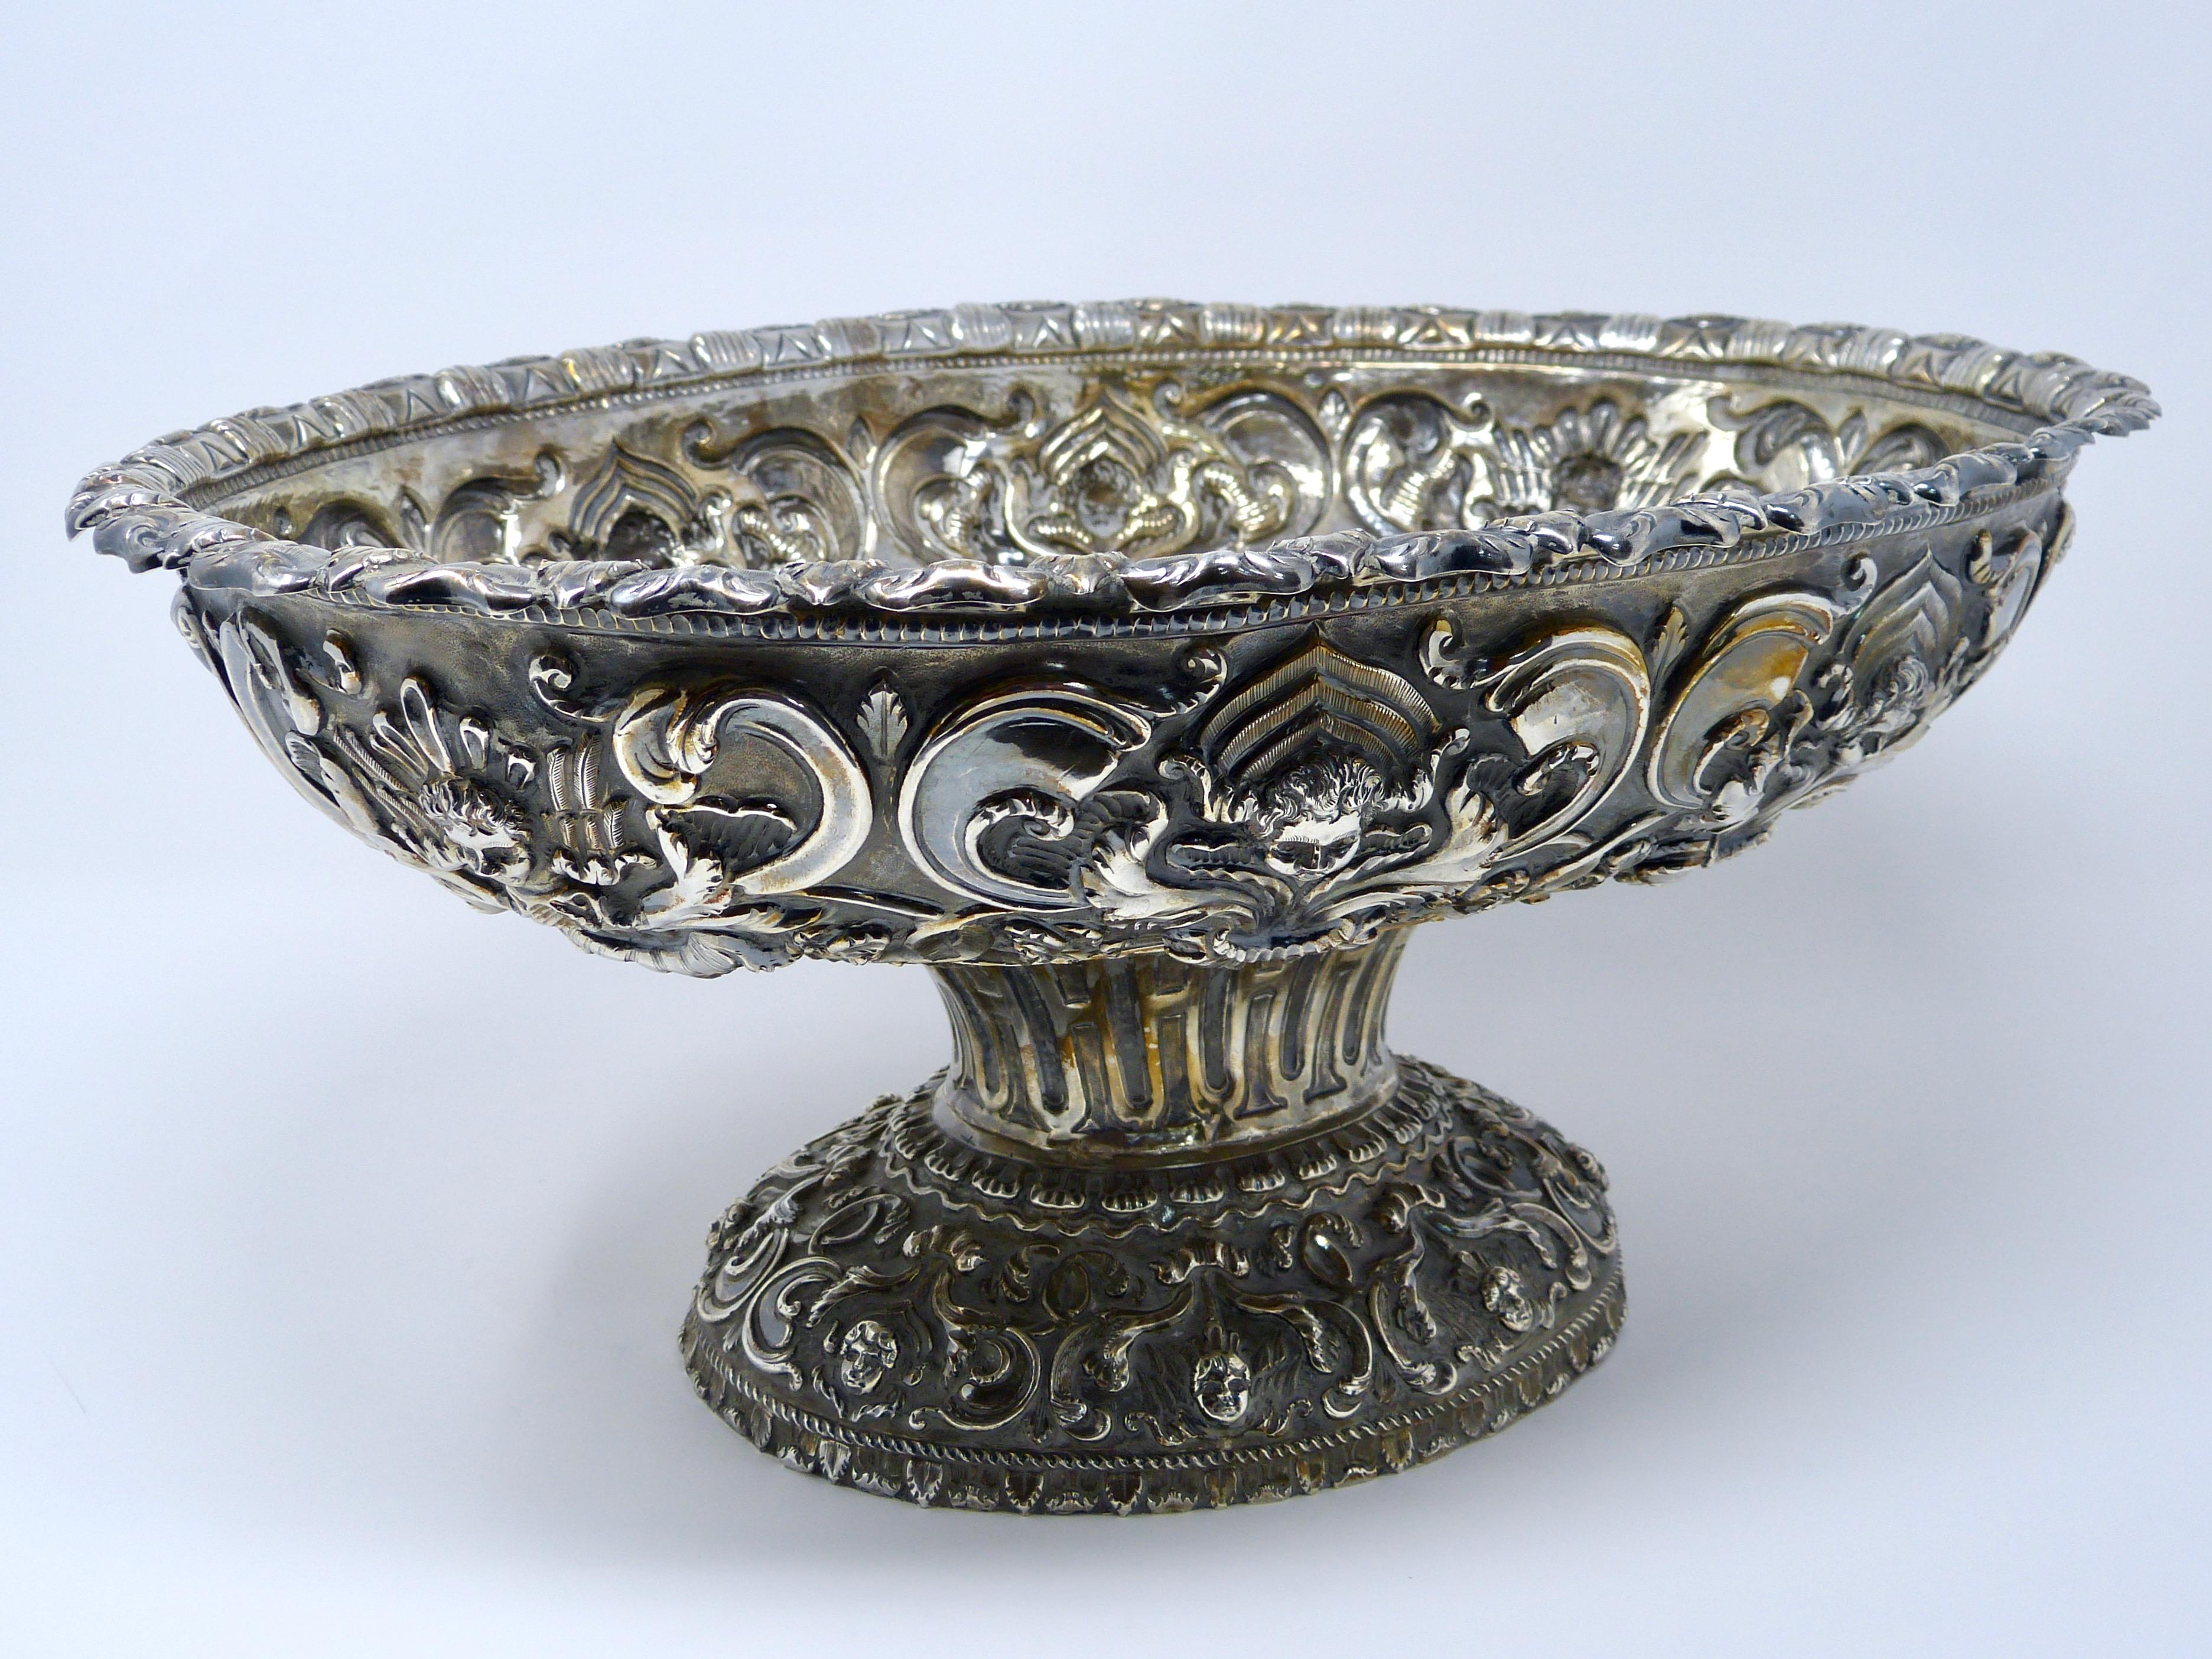 Spanish Colonial style sterling silver centrepiece with cherubs.
The whole piece was handmade by Hammer in 0.925 sterling silver.
Made in central America (Bolivia)
Weight 2910 Lbs.